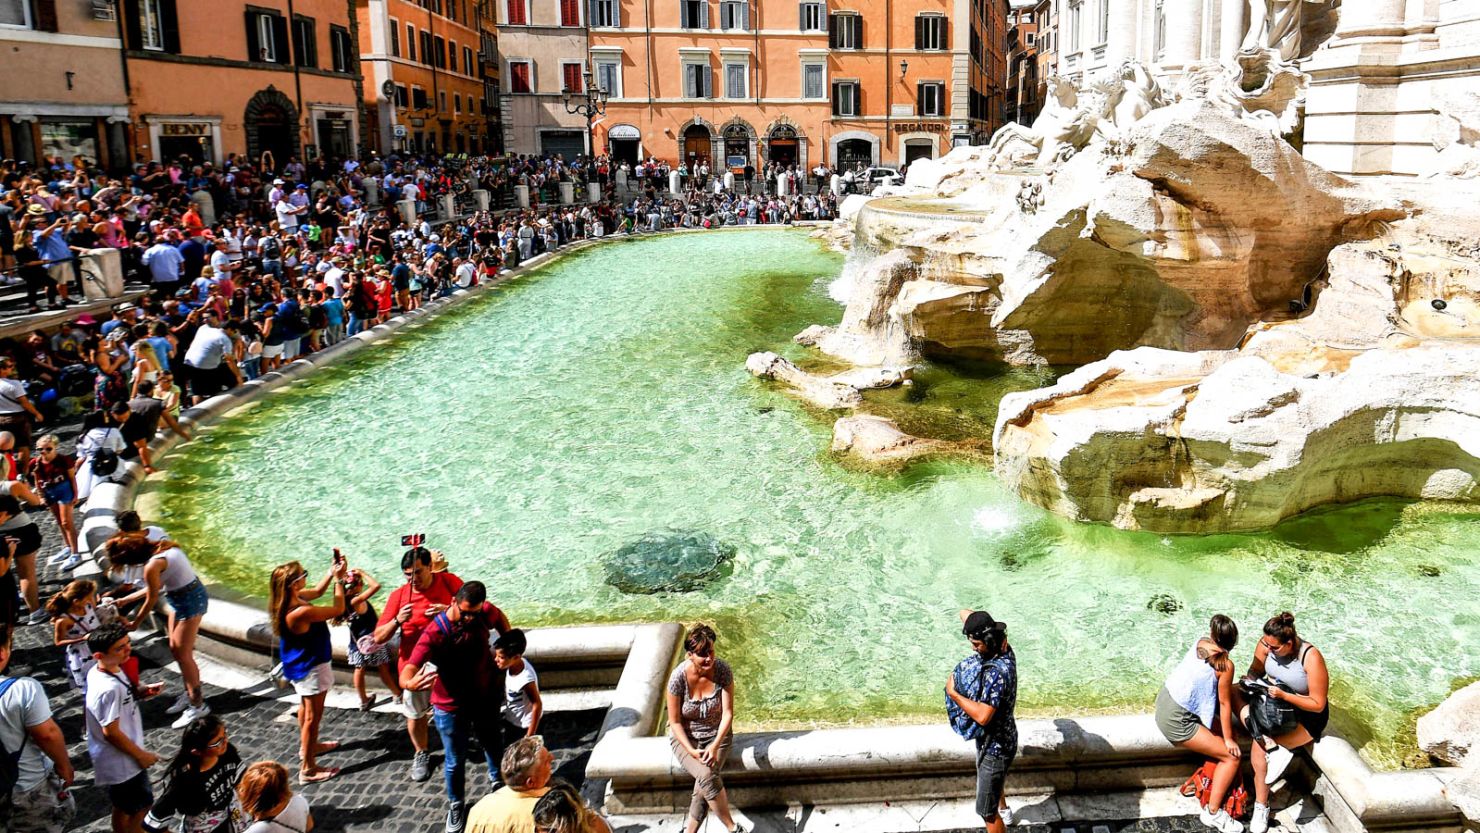 The Trevi Fountain is one of Rome's most popular attractions.